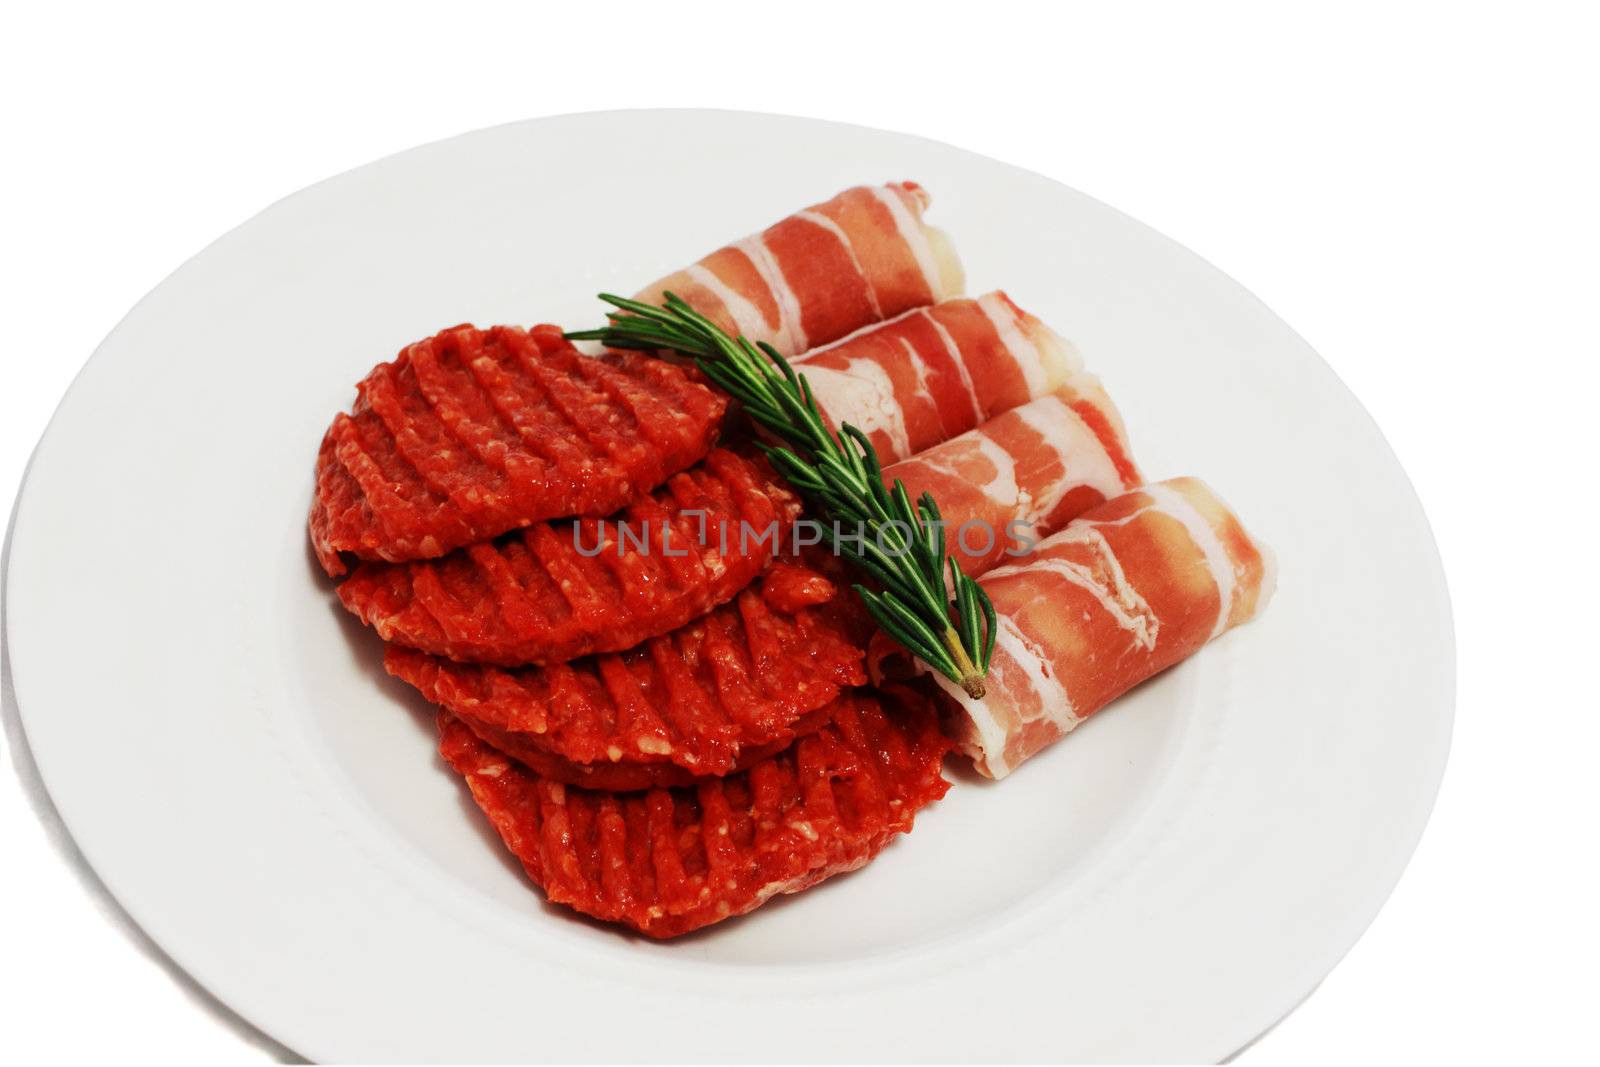 cutlets and rolls made of raw meat for barbecue